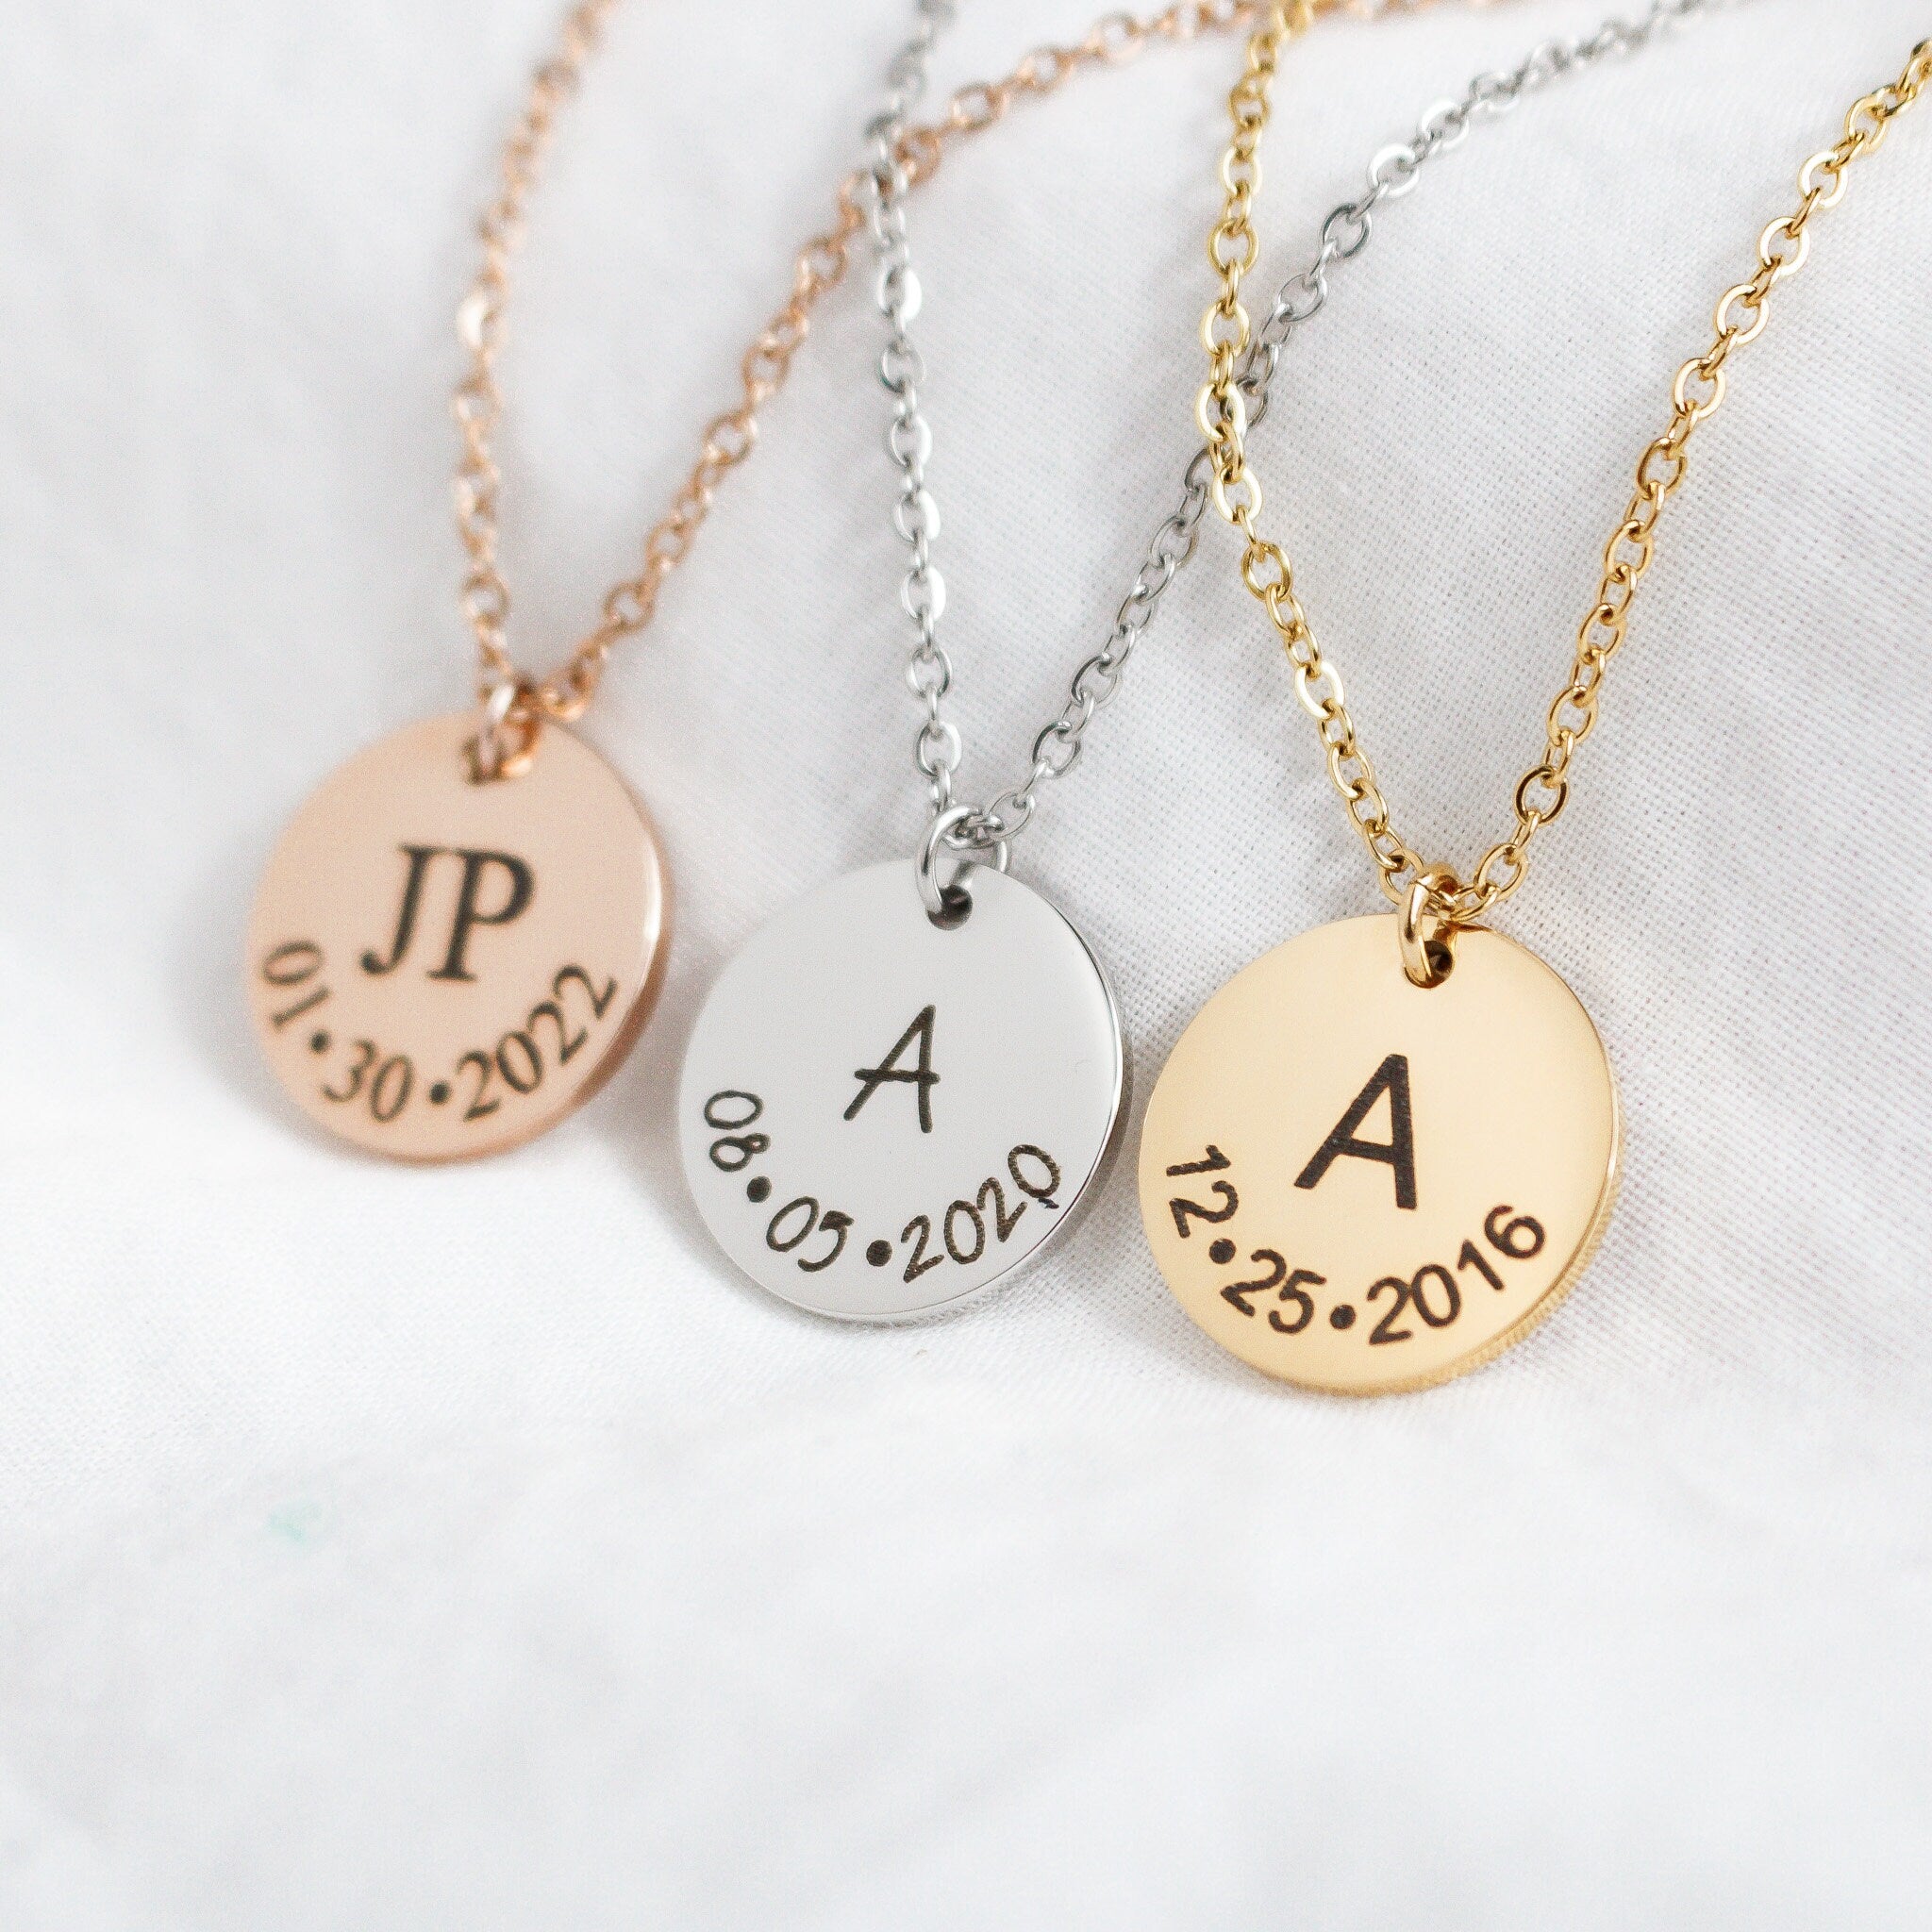 Buy Personalized Necklace With Initials and Date // Anniversary Necklace //  Hand Stamped Jewelry // Hand Stamped Necklace Online in India - Etsy